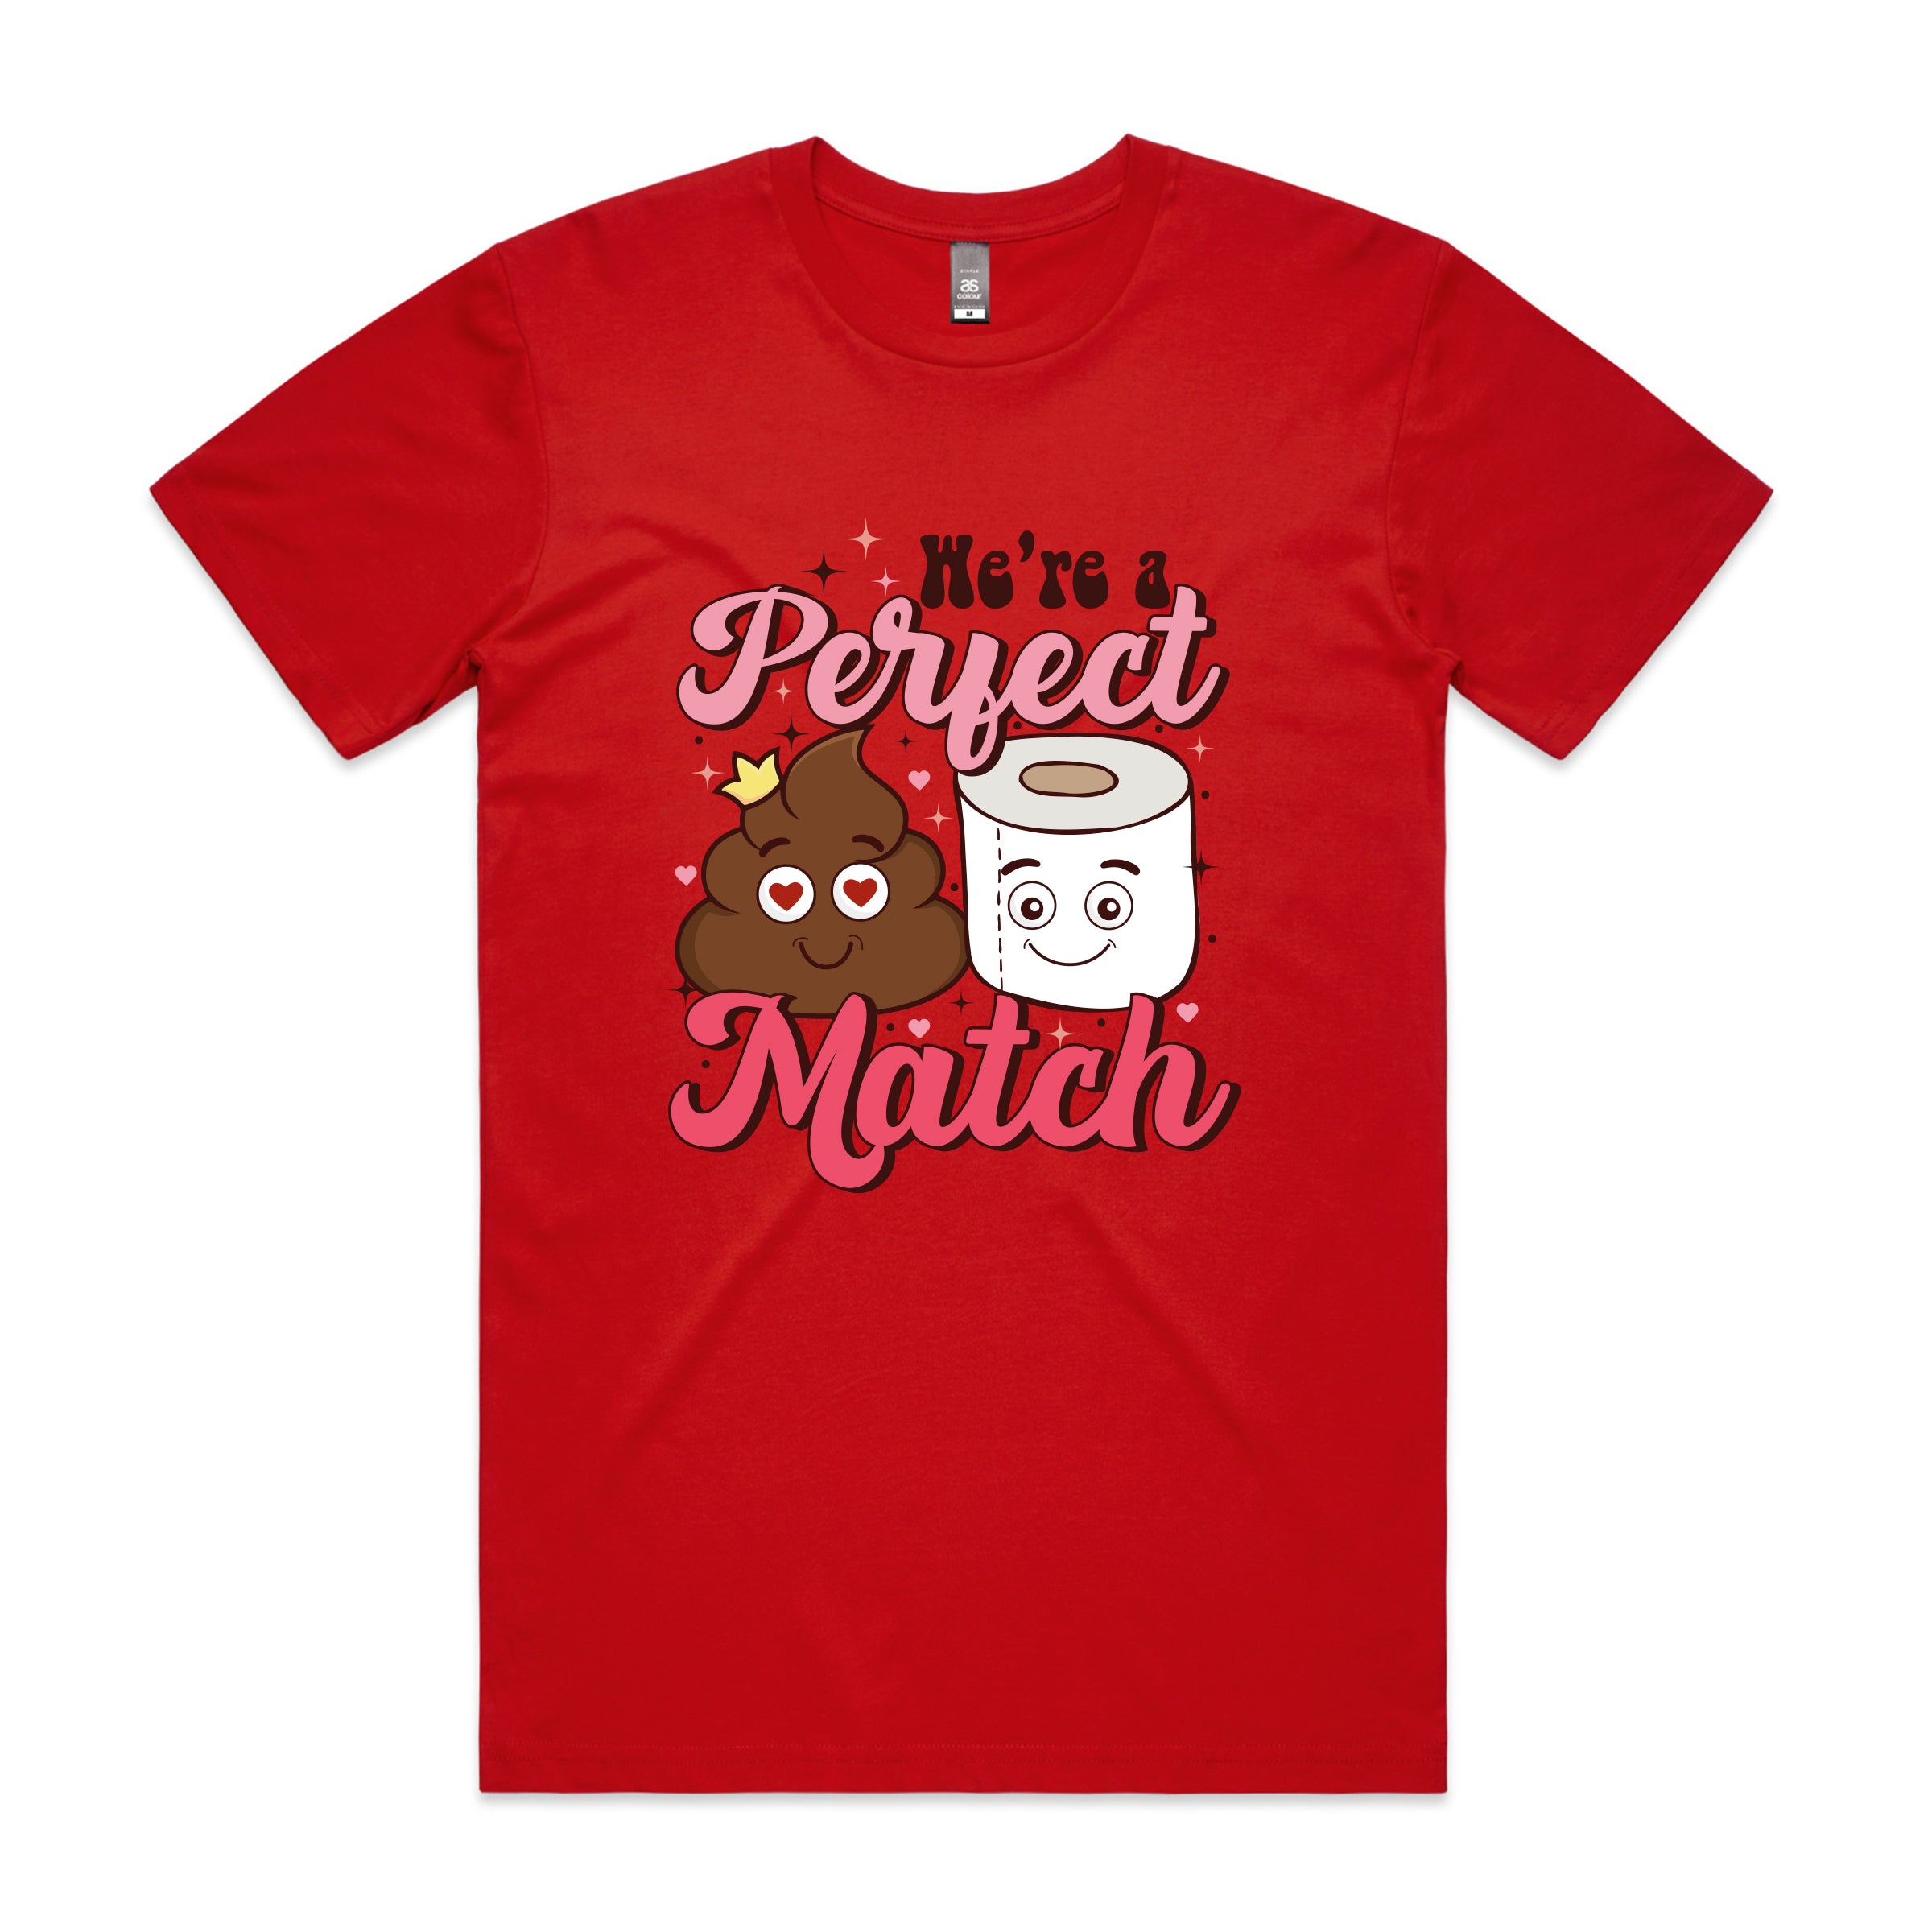 WE'RE A PERFECT MATCH TSHIRT